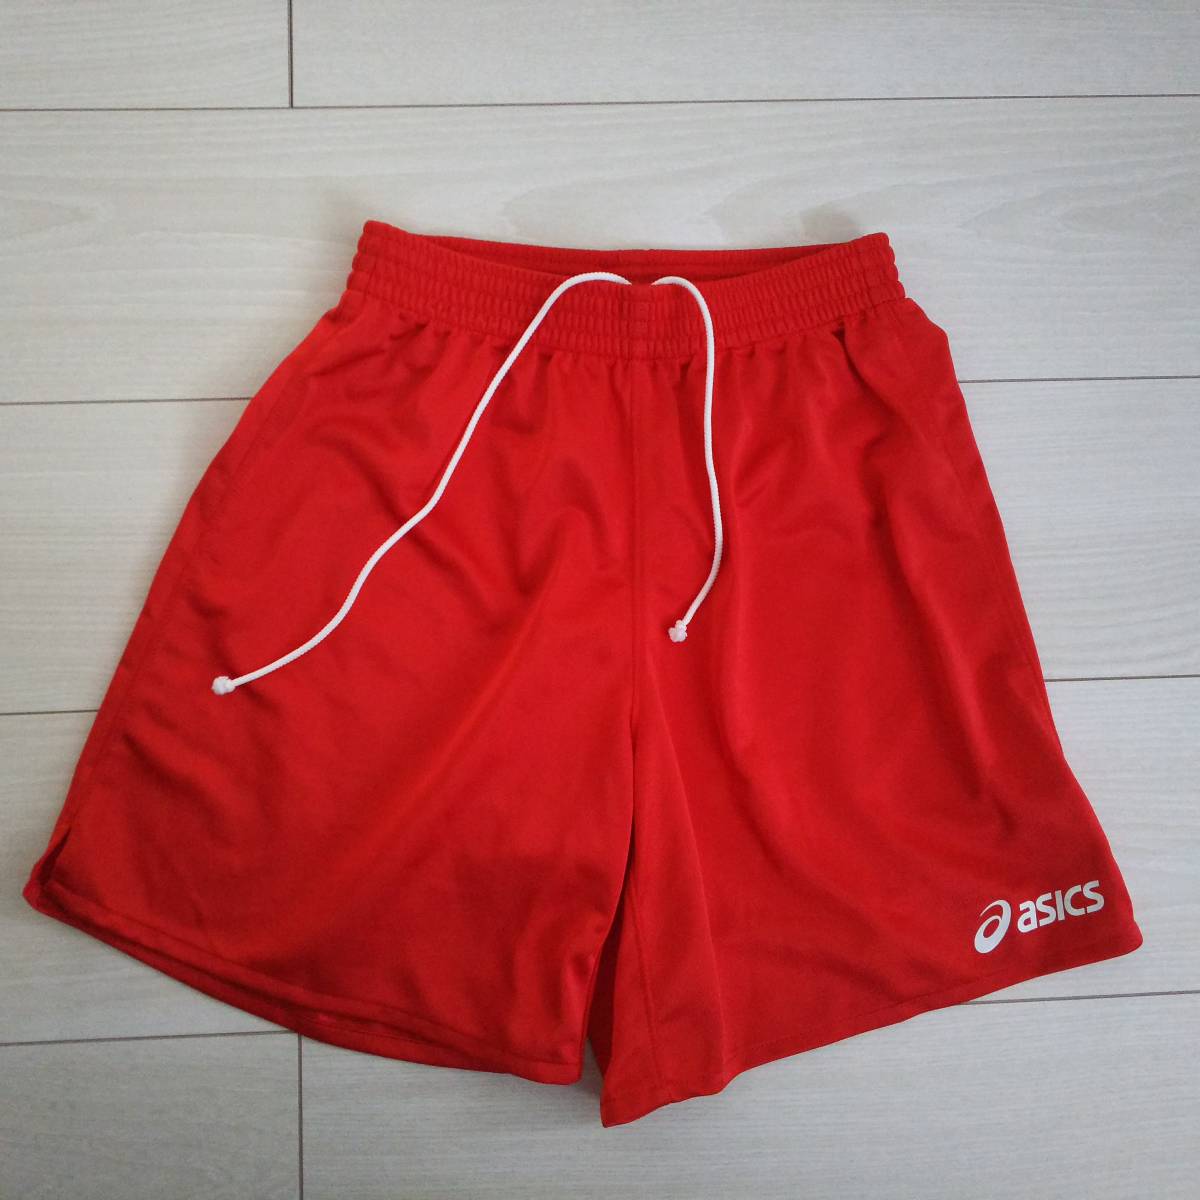 * Asics asics made in Japan 150 size shorts short pants red XS3610*